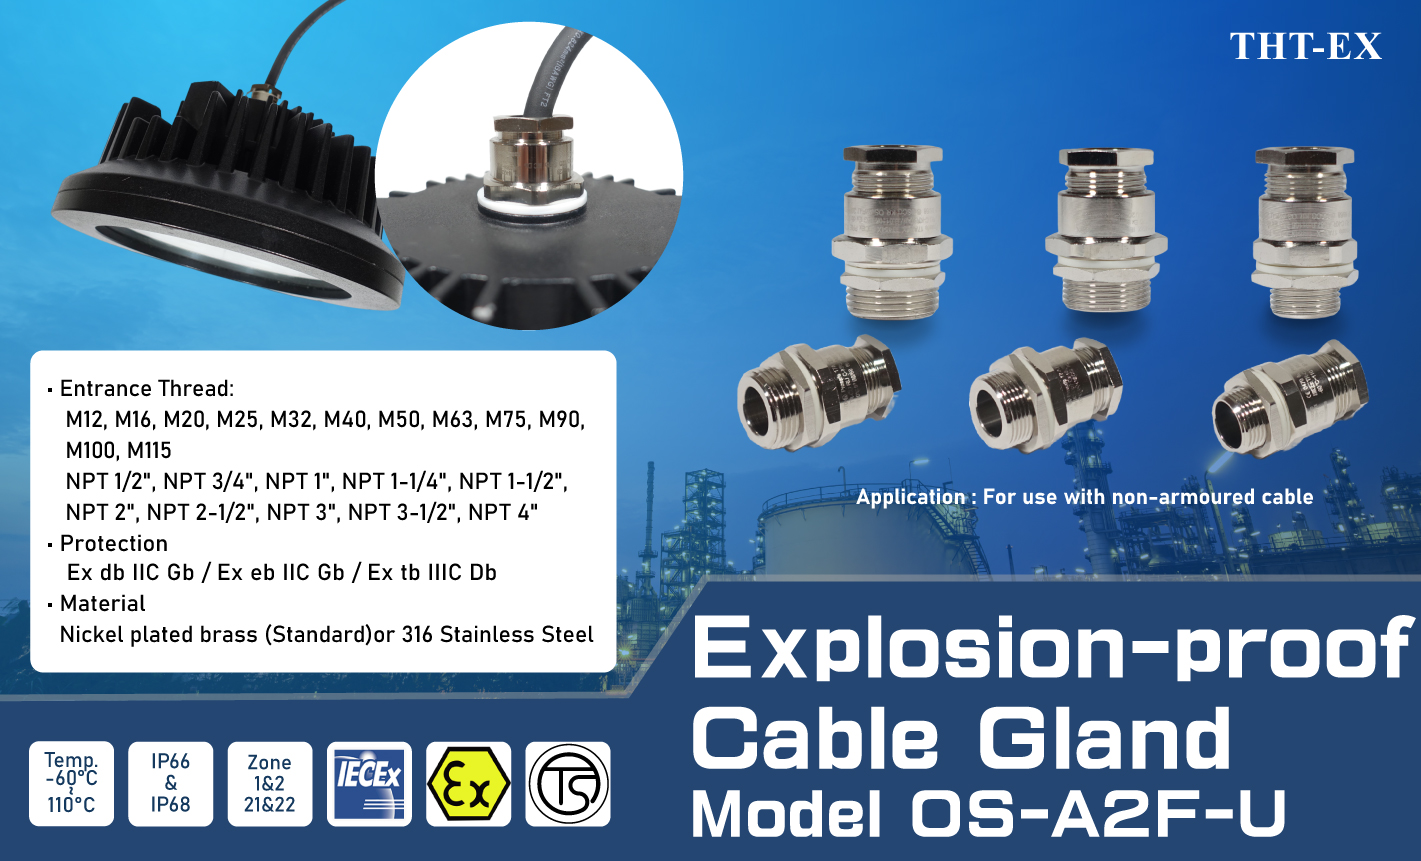 THT-EX Economical Explosion-proof Cable Gland for Zone 1, Zone 2 Areas